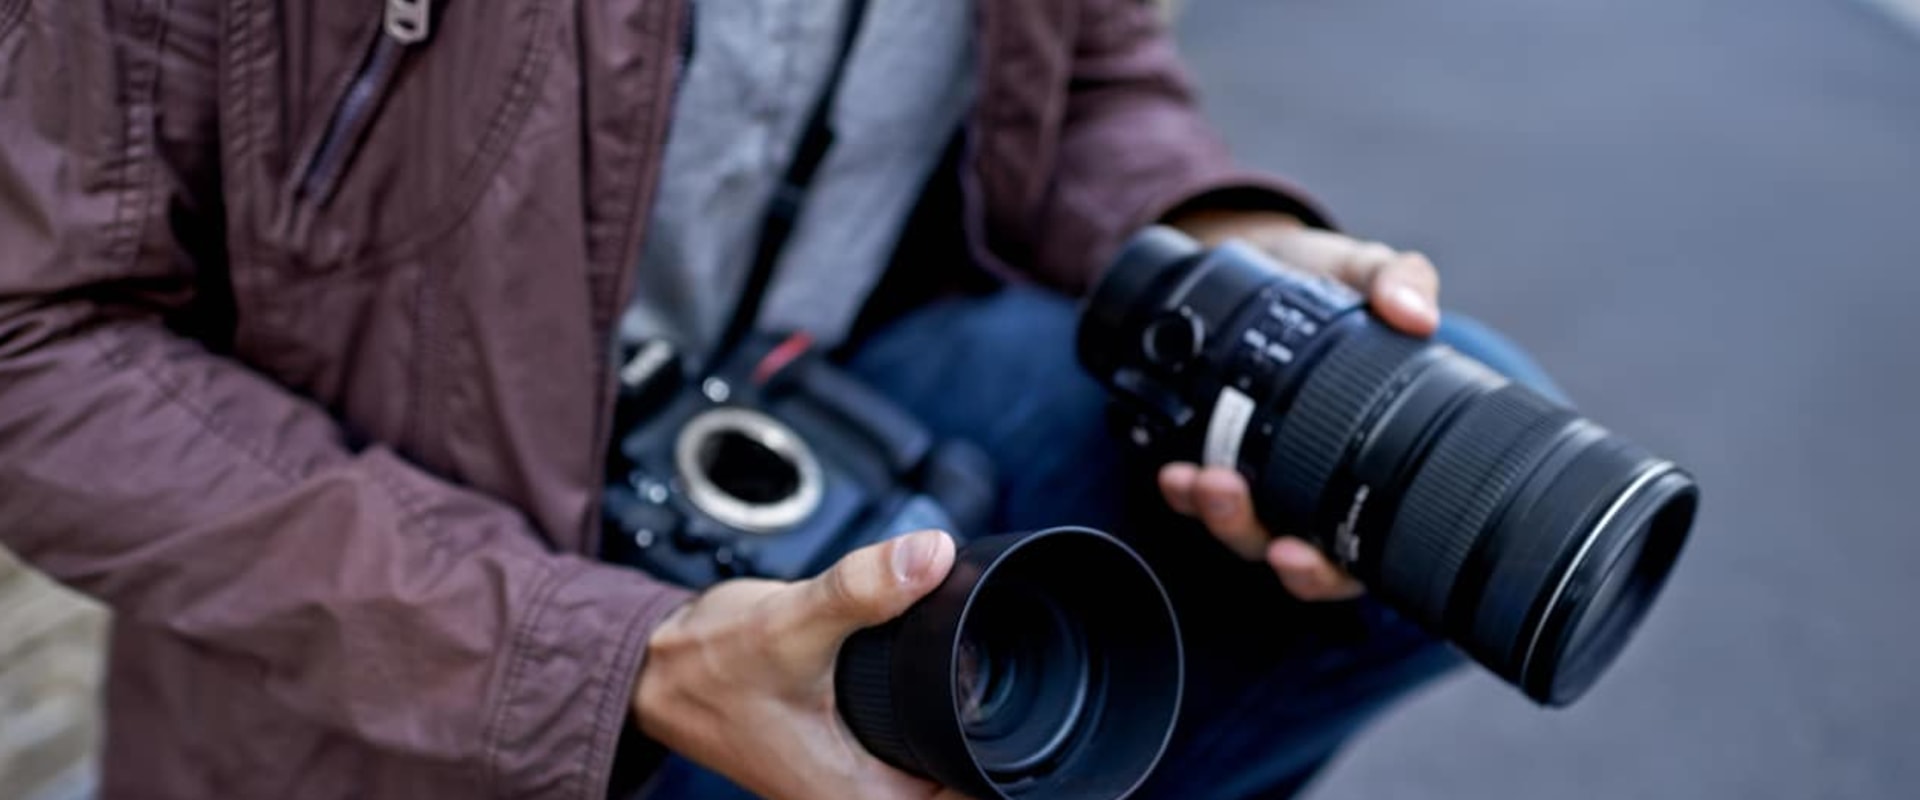 Why Photographers Need Liability Insurance